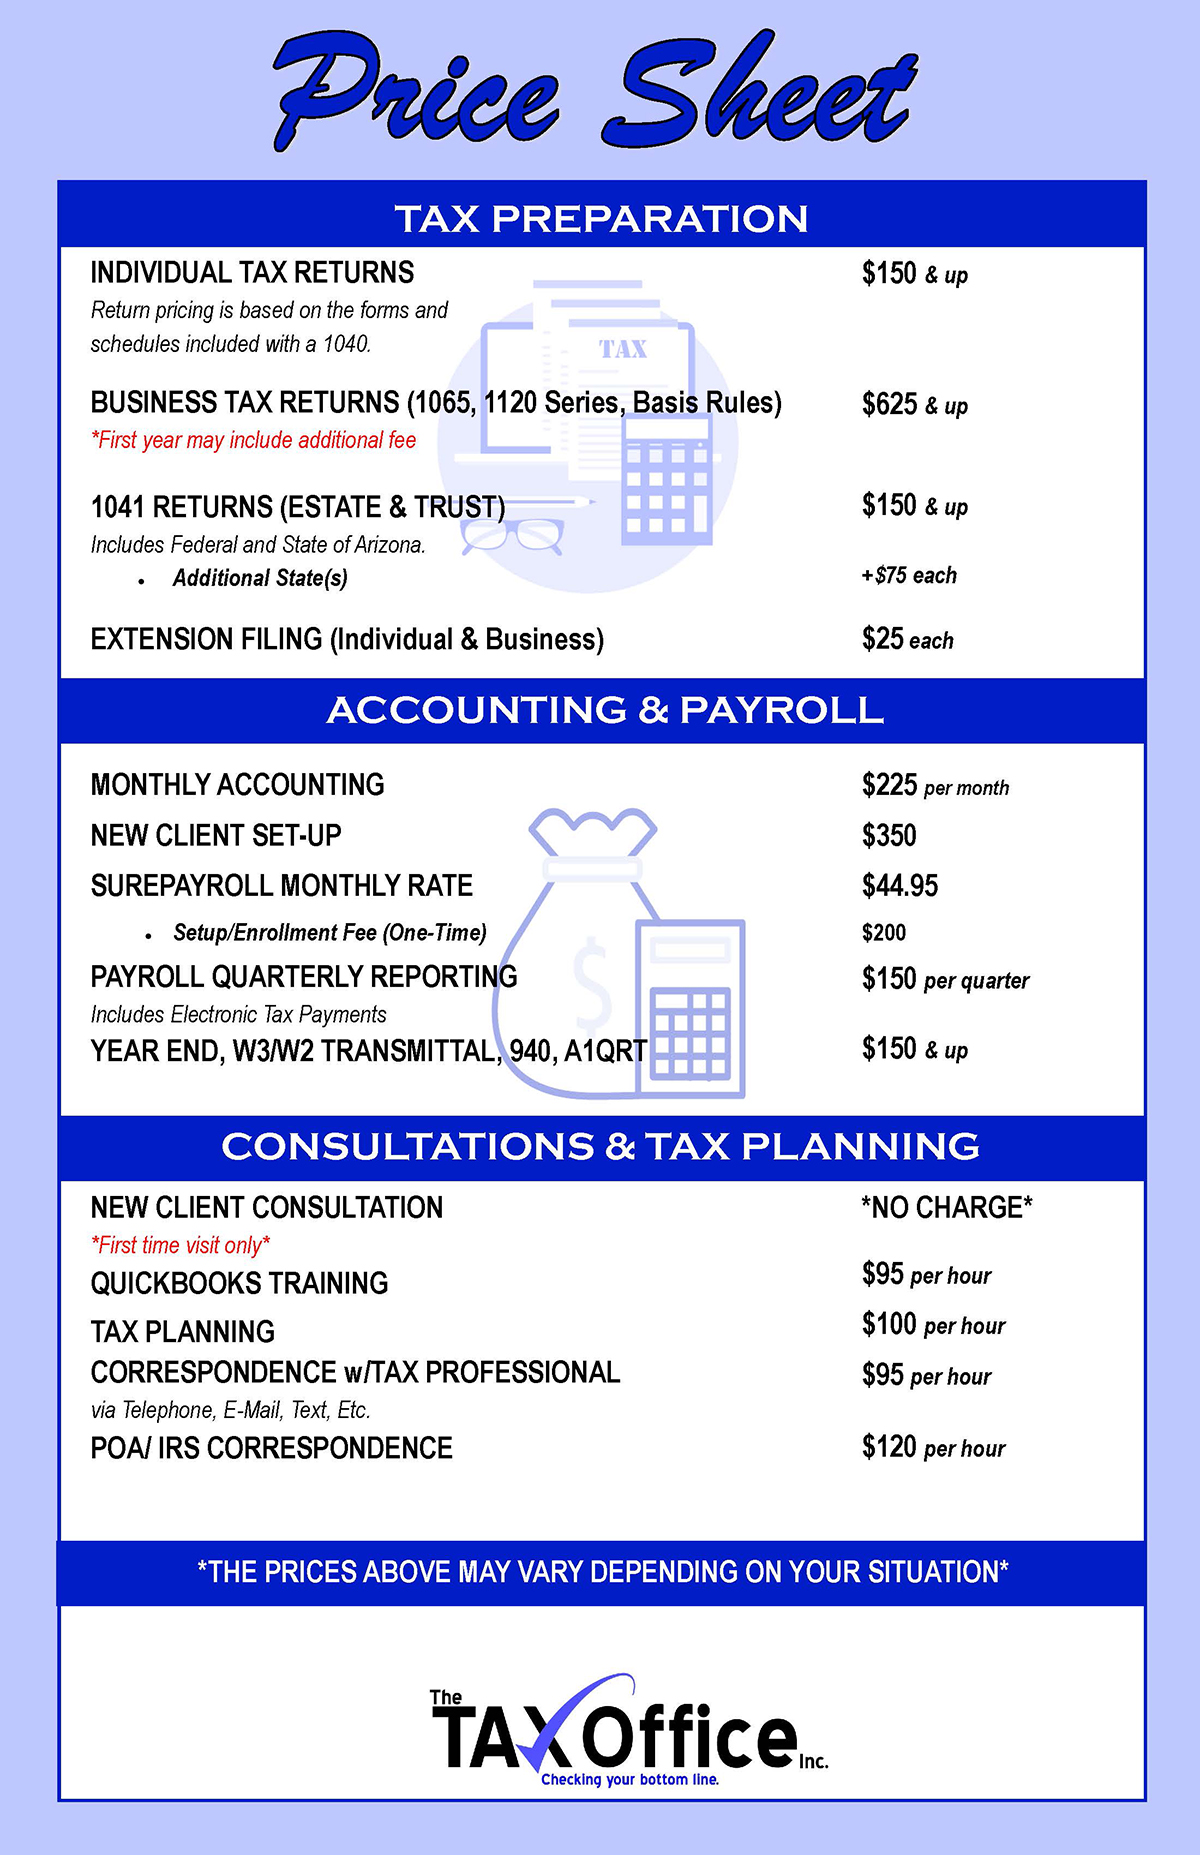 Pricing The Tax Office Inc.